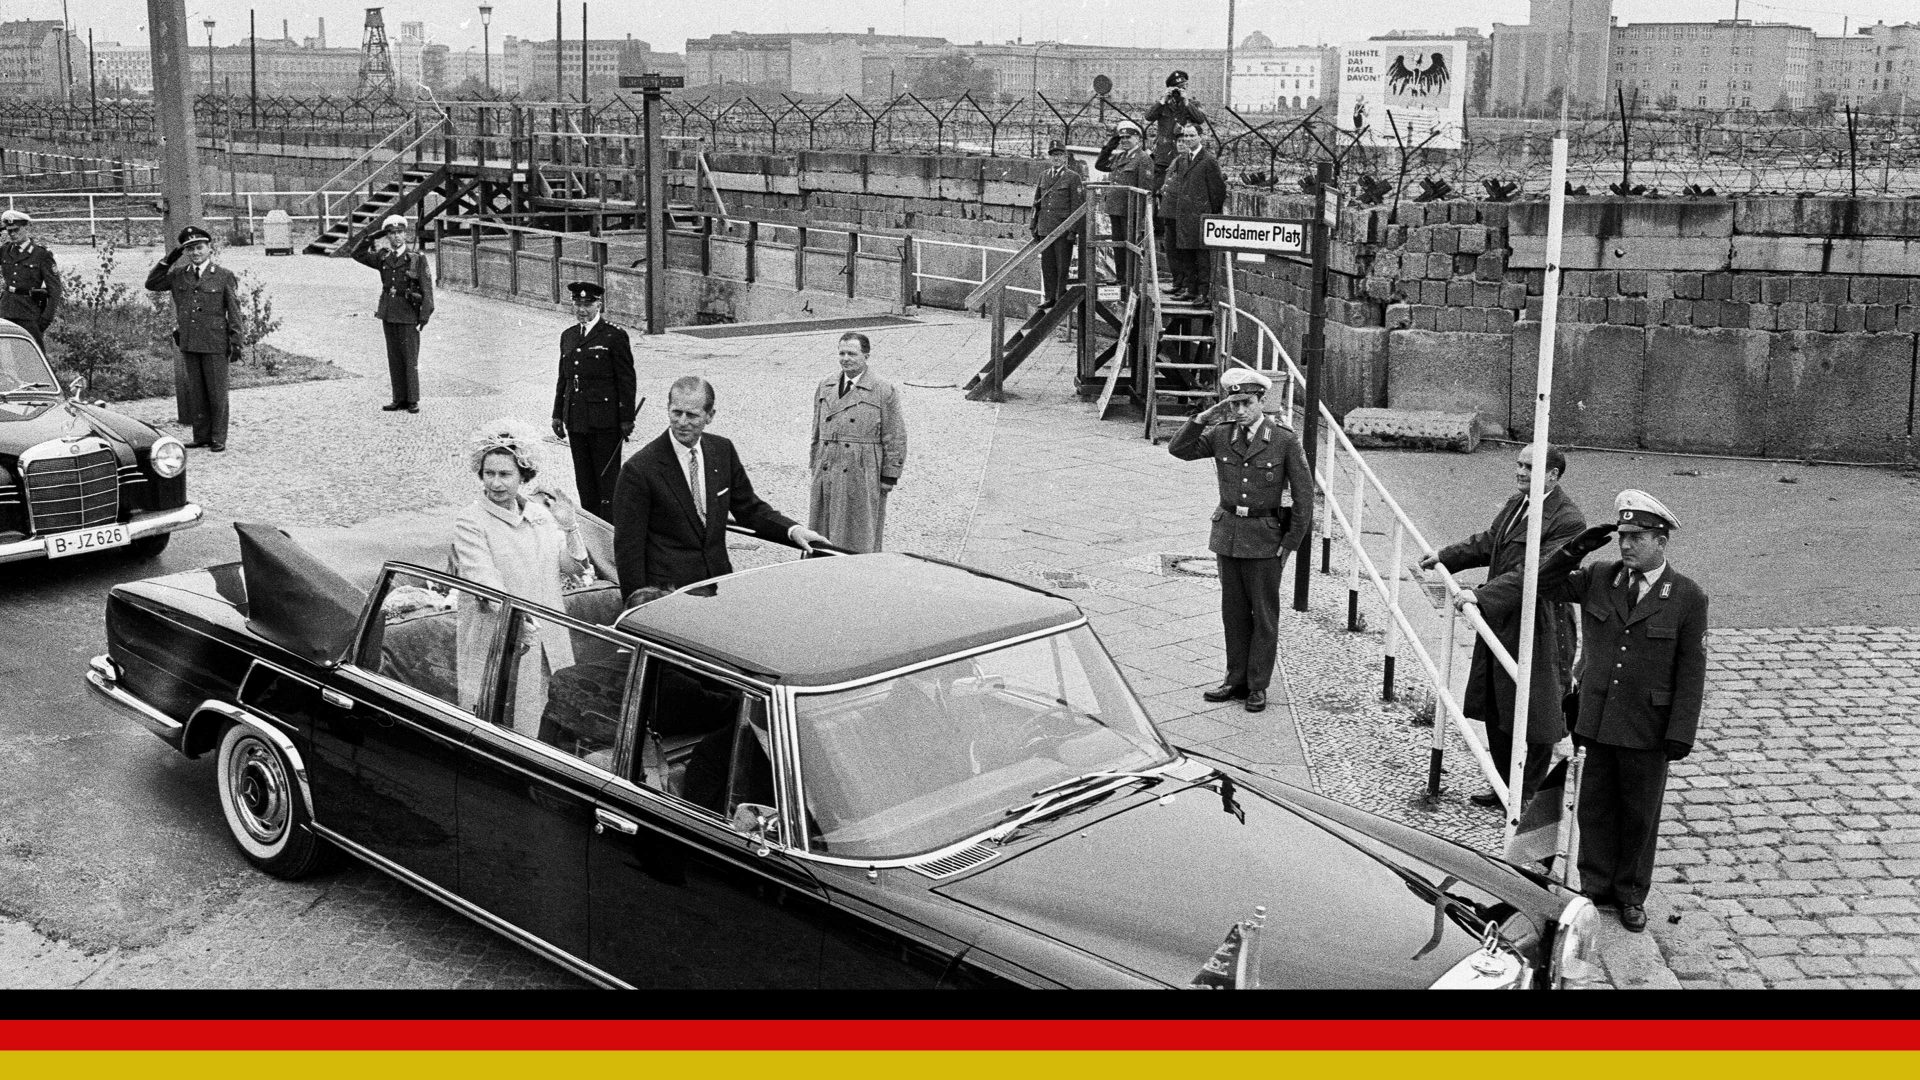 The Queen and Prince Philip at the Berlin Wall during their visit to West Germany, May 1965. Photo: Ron Burton/Mirrorpix